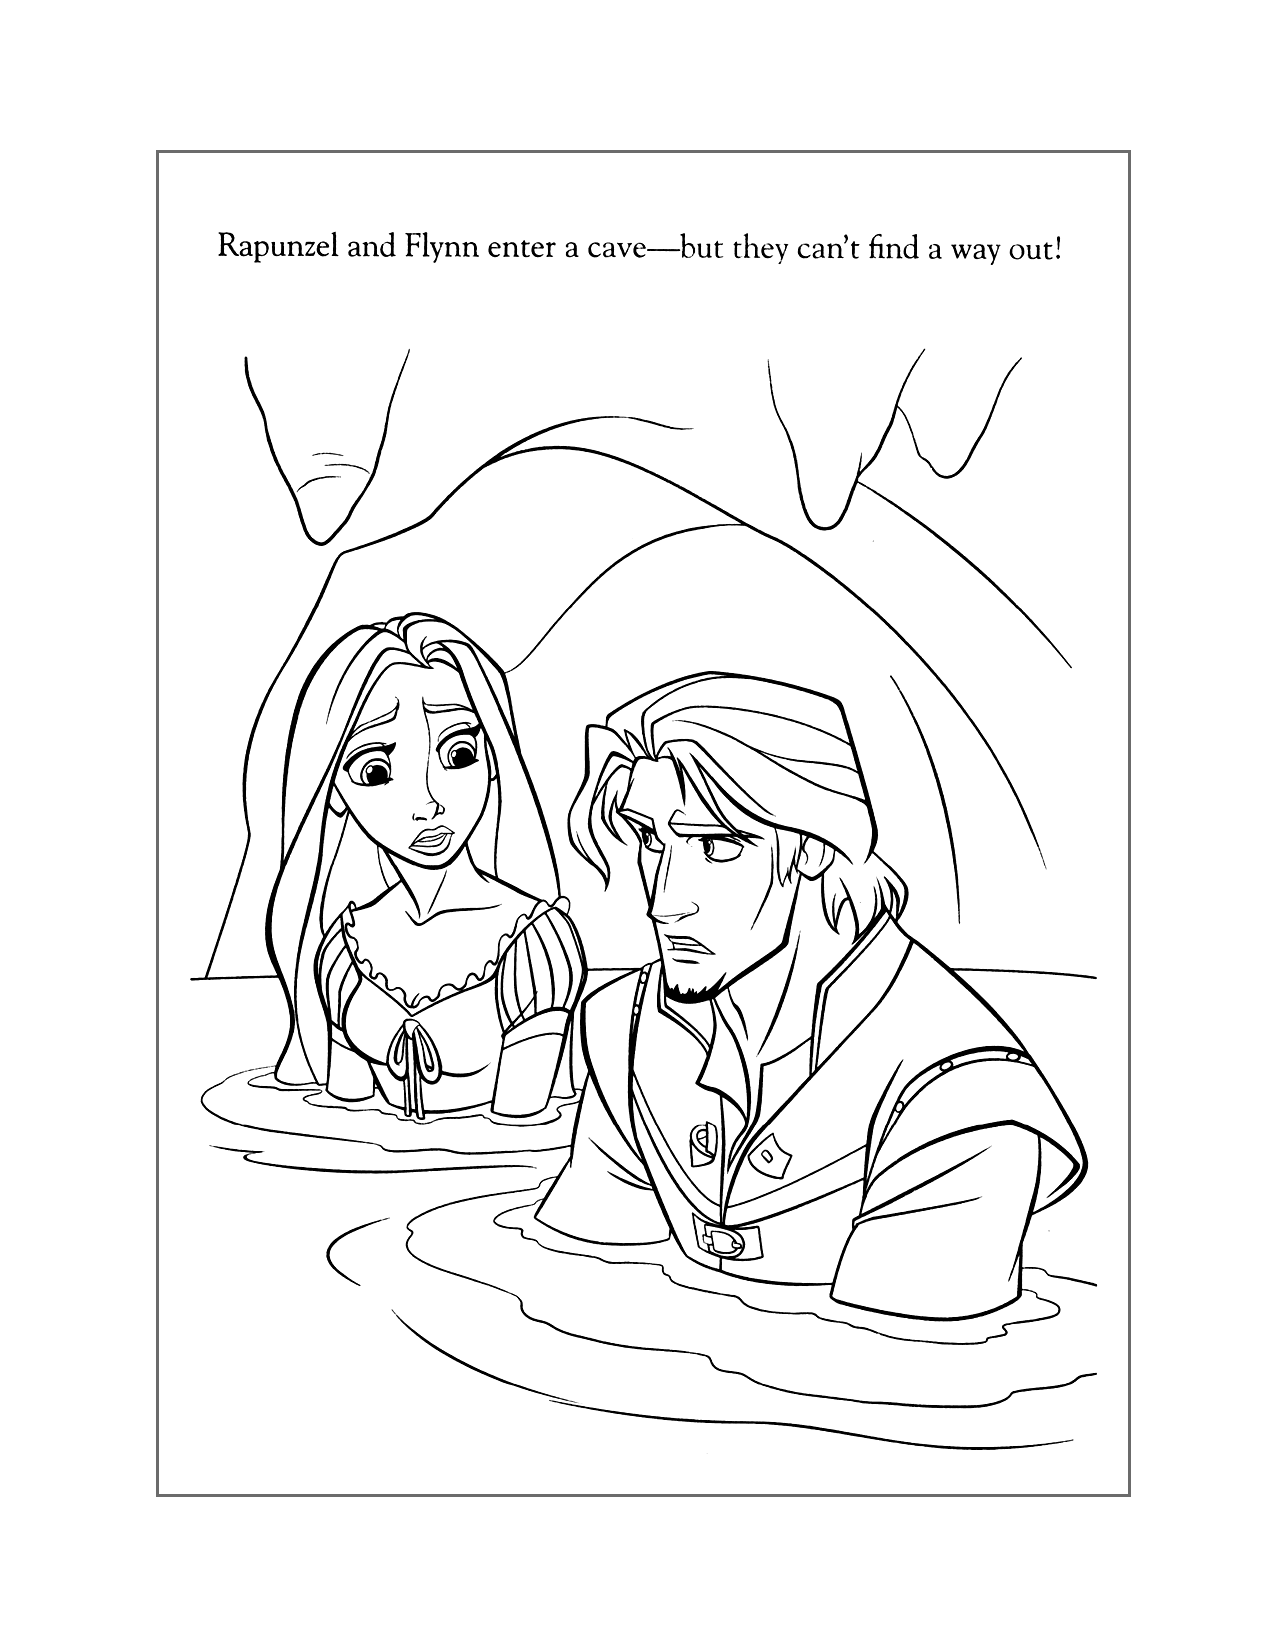 Rapunzel And Flynn In A Cave Coloring Page